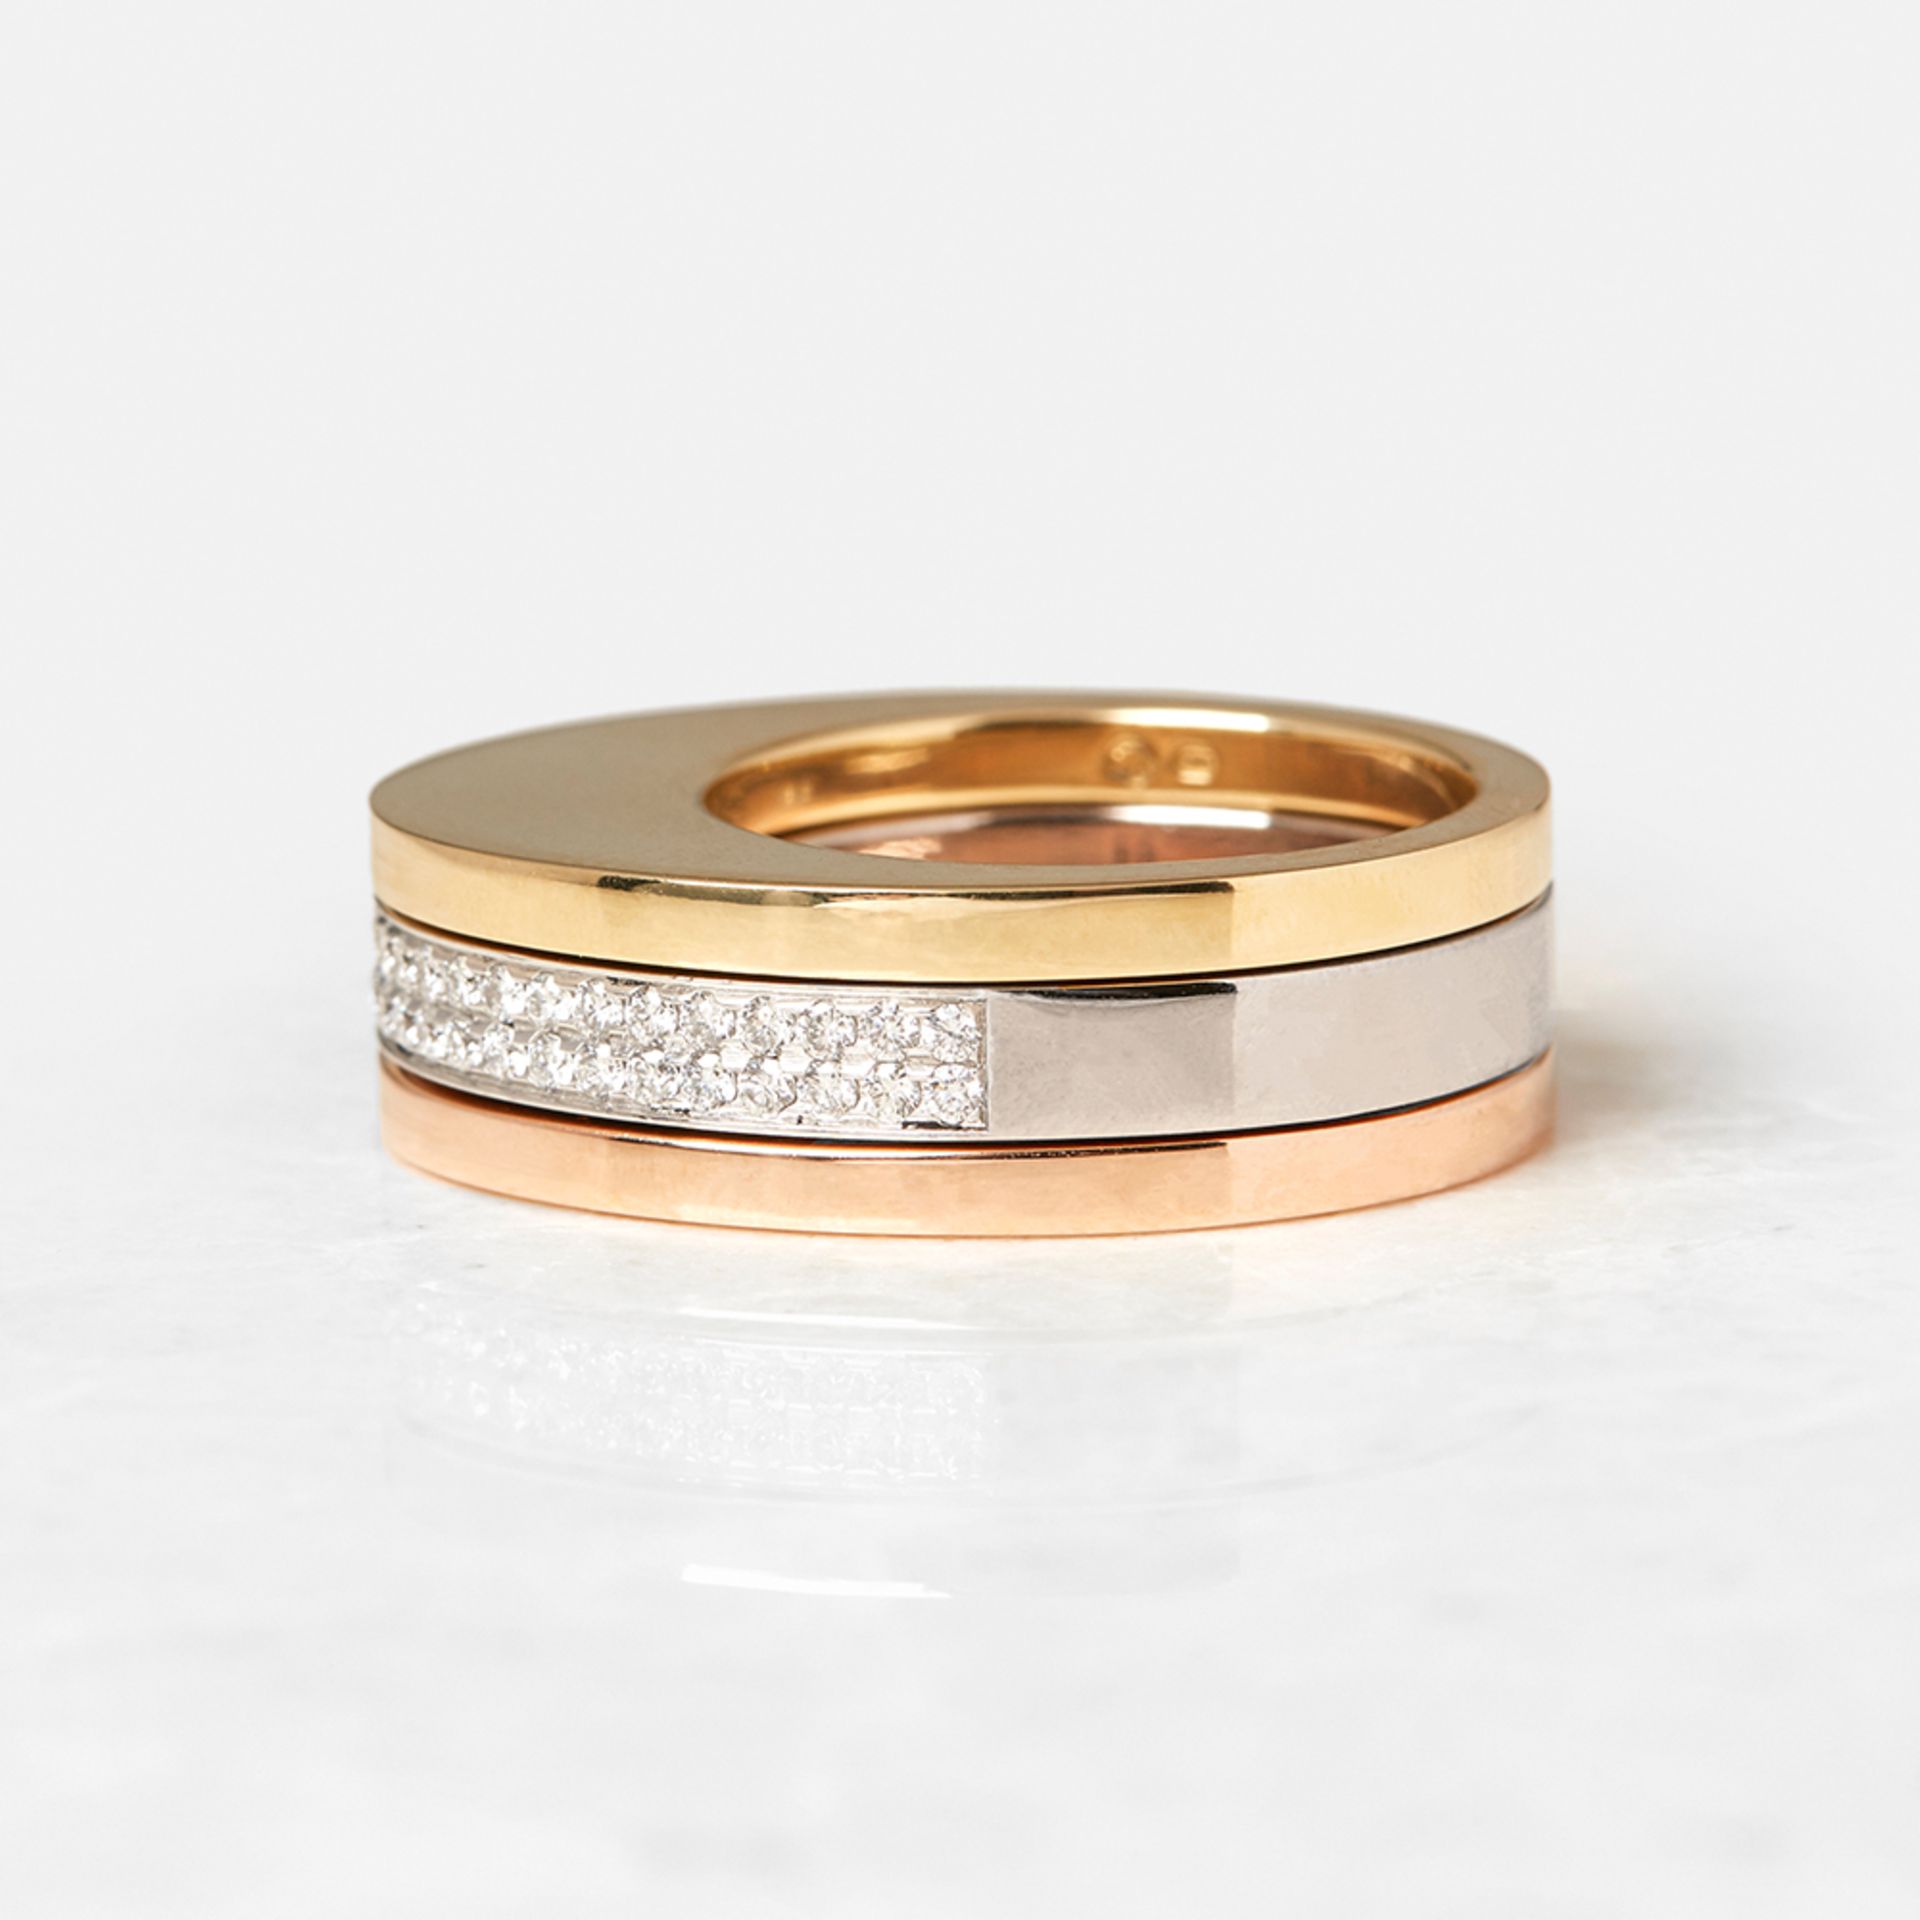 Tiffany & Co. 18k White, Rose & Yellow Gold Stackable Rings - Image 2 of 10